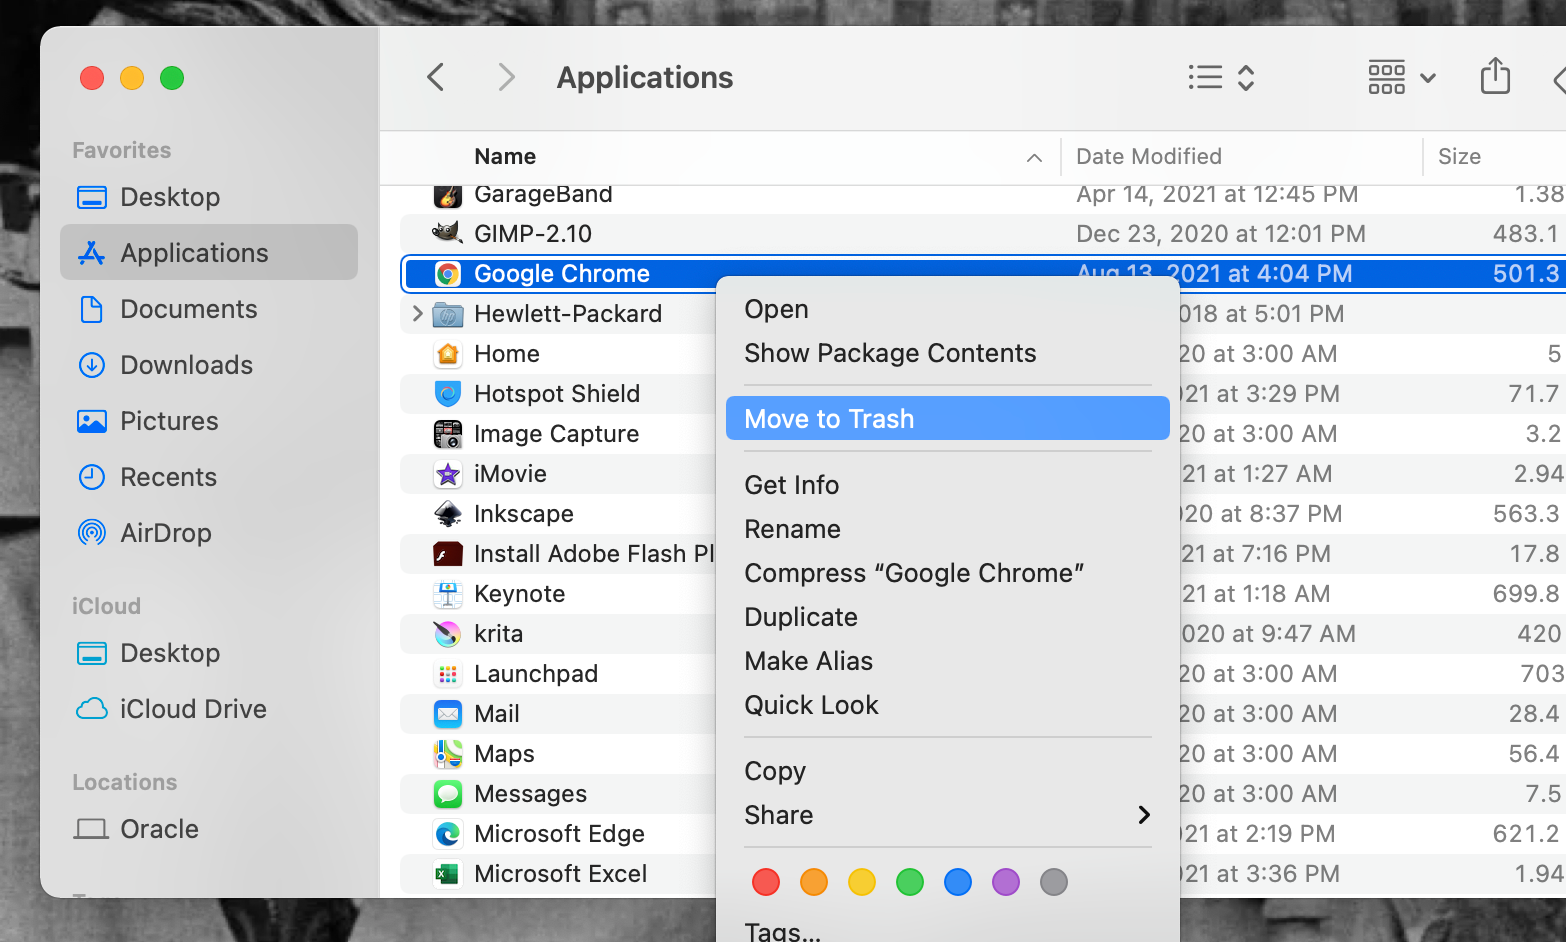 The Google Chrome application being moved to Trash within a MacBook Pro's Applications folder